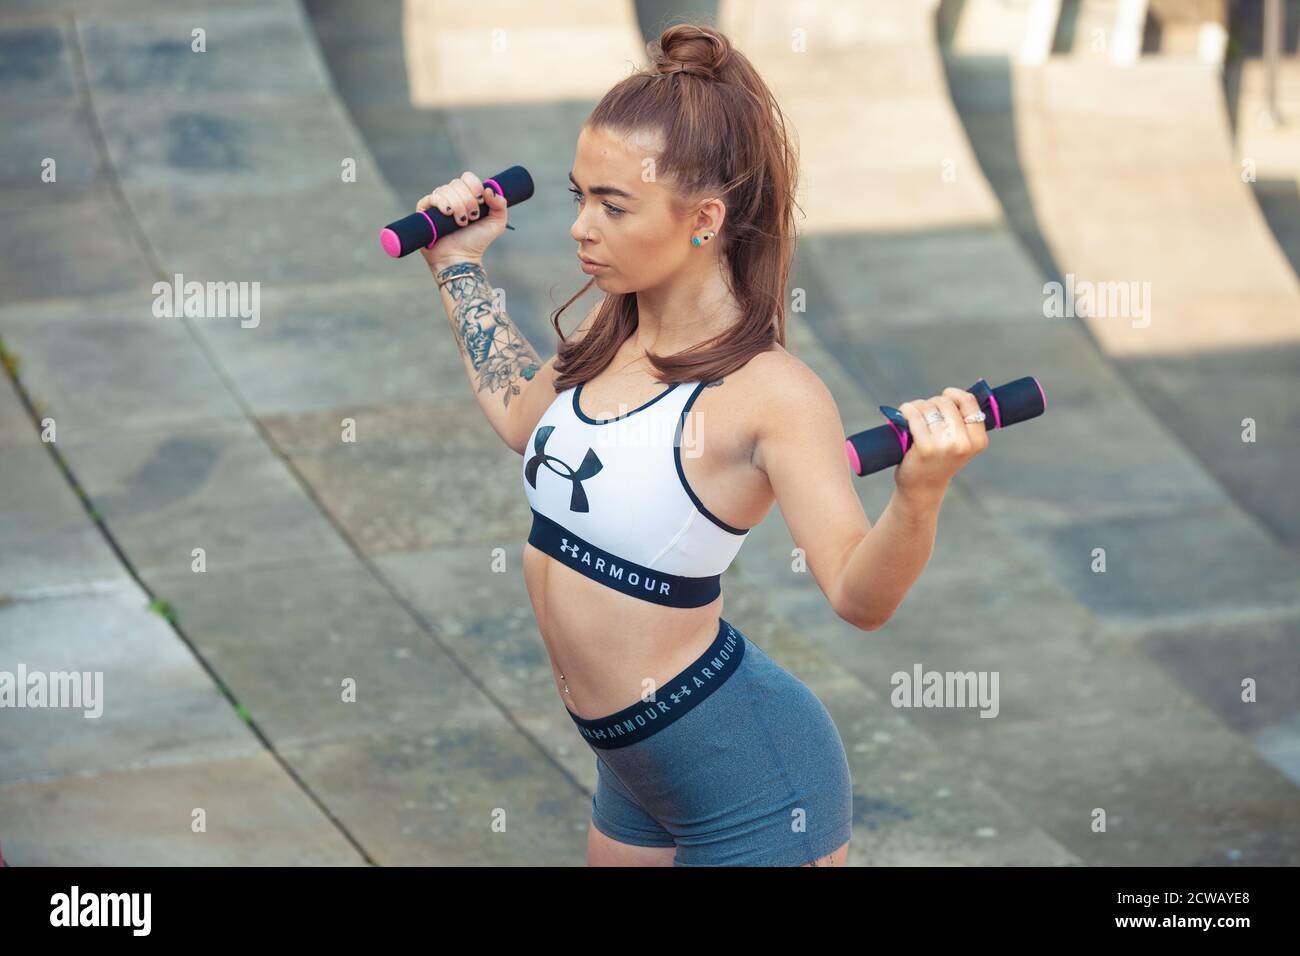 Woman exercising outdoors with hand weights Stock Photo